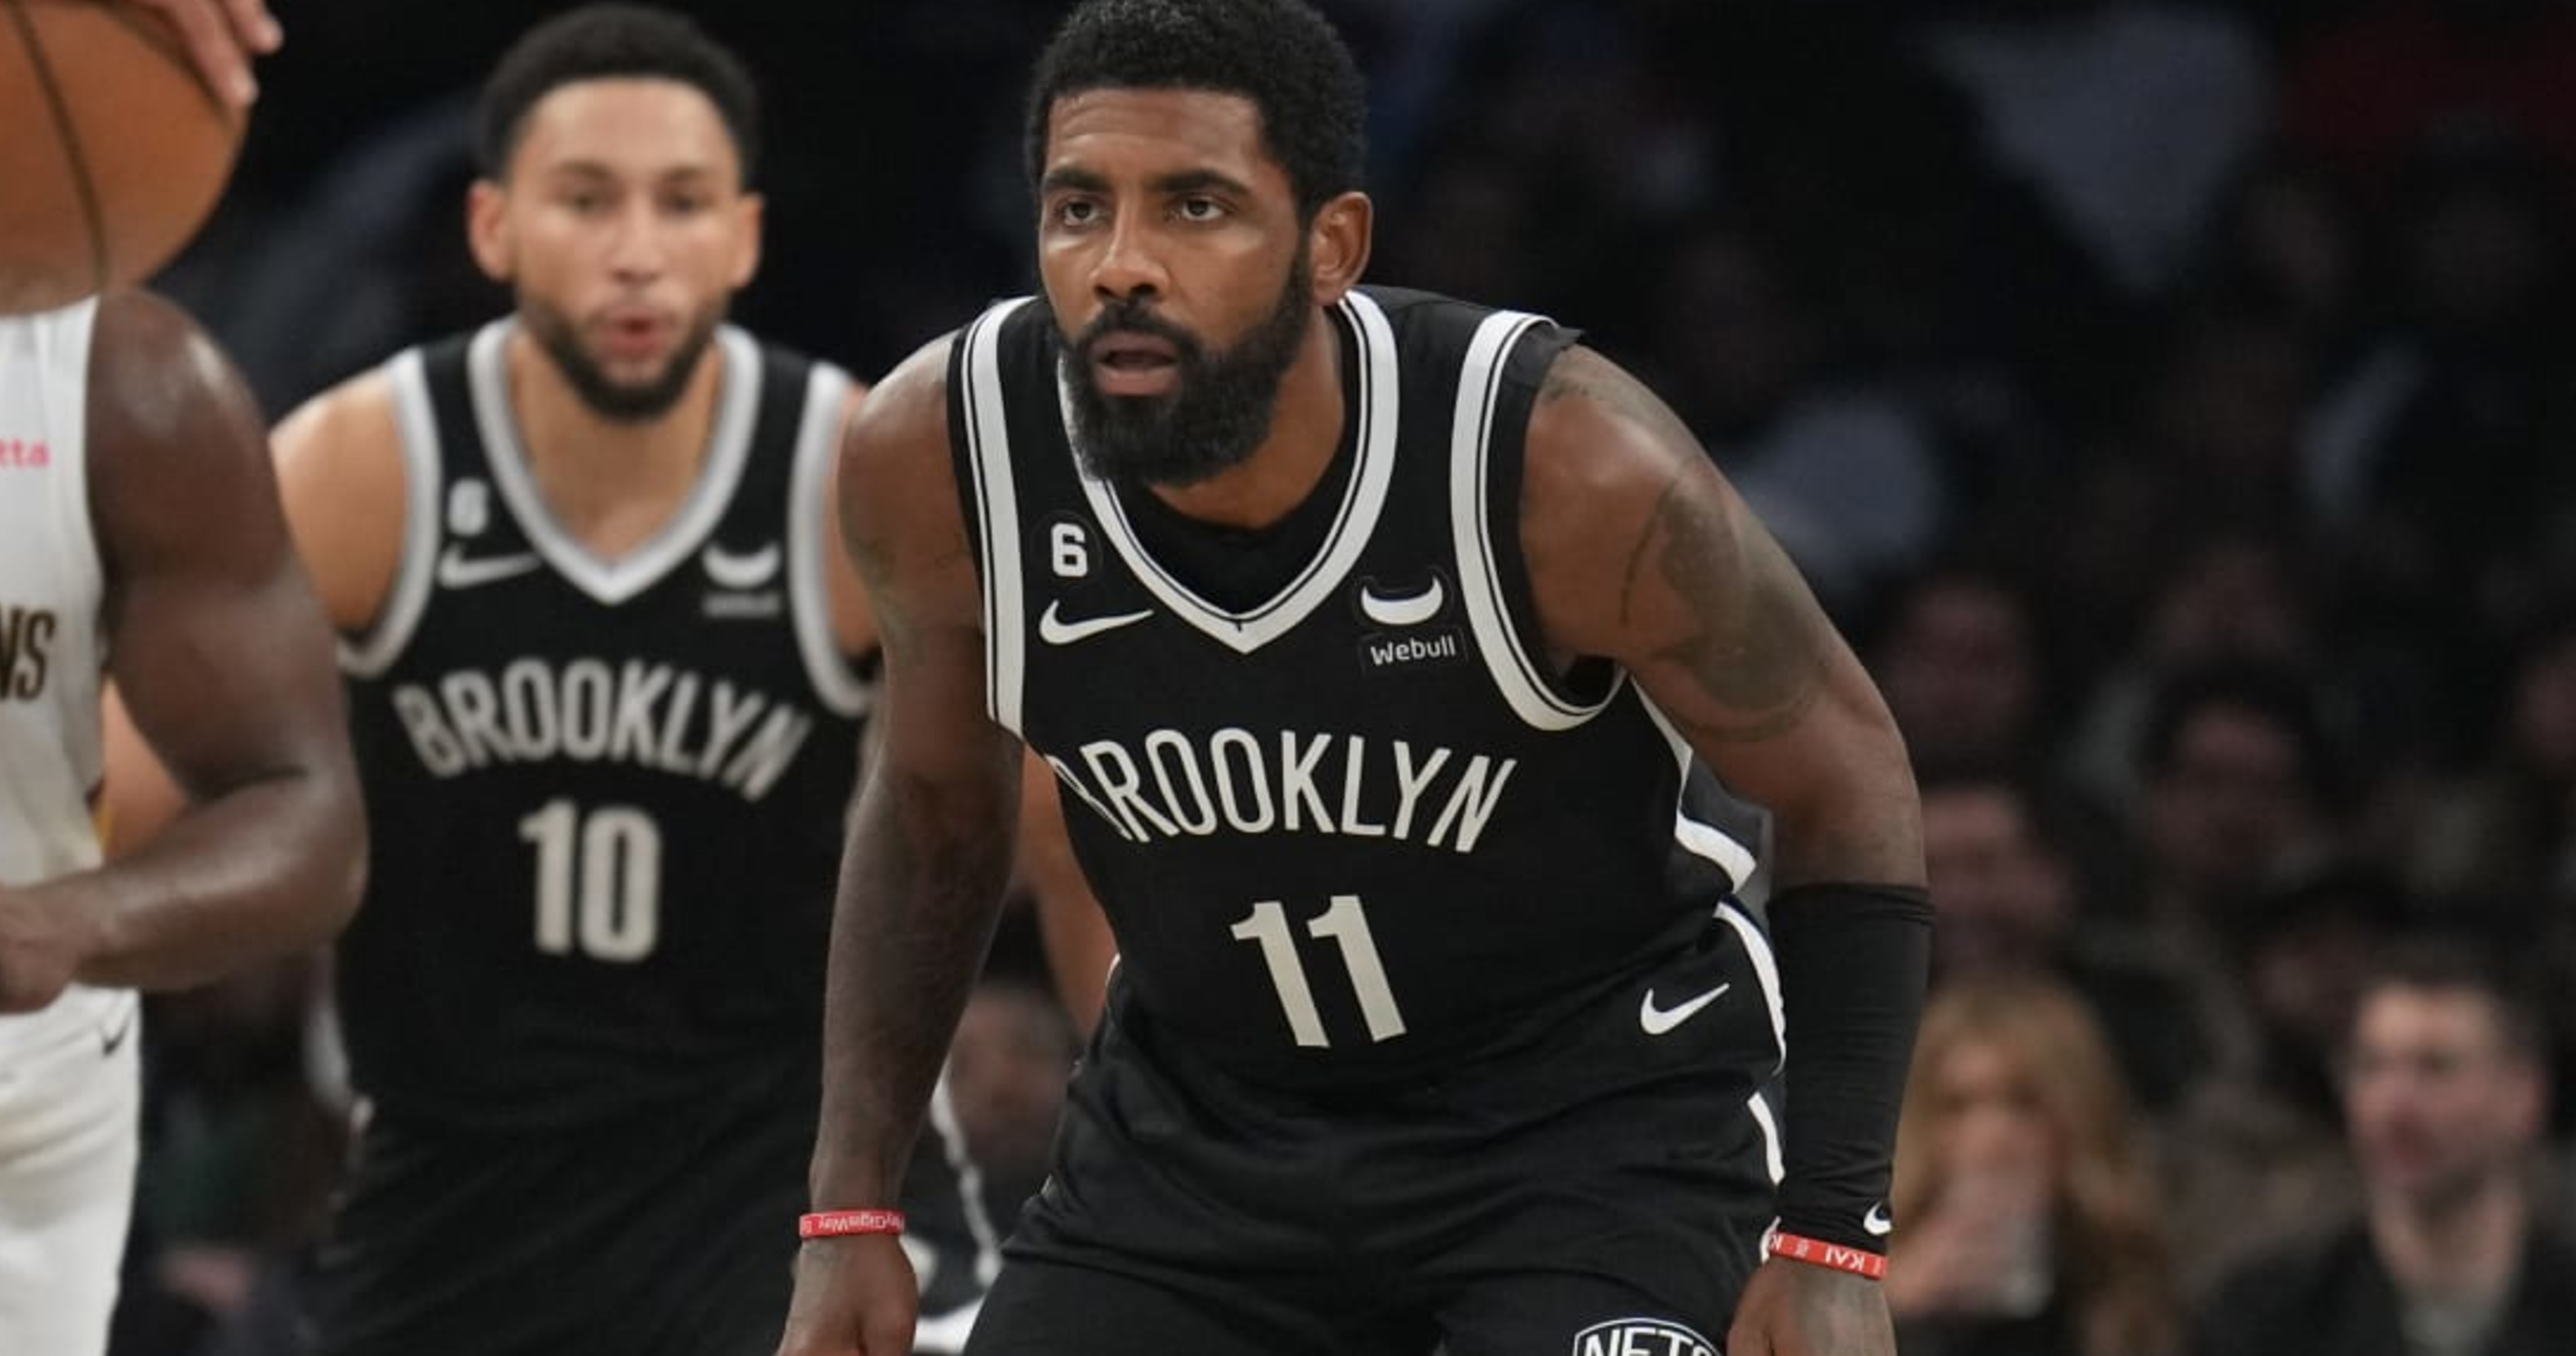 in final jersey sales data, Nets 'Big Three' all in Top 10; Team ranks No.  2 - NetsDaily